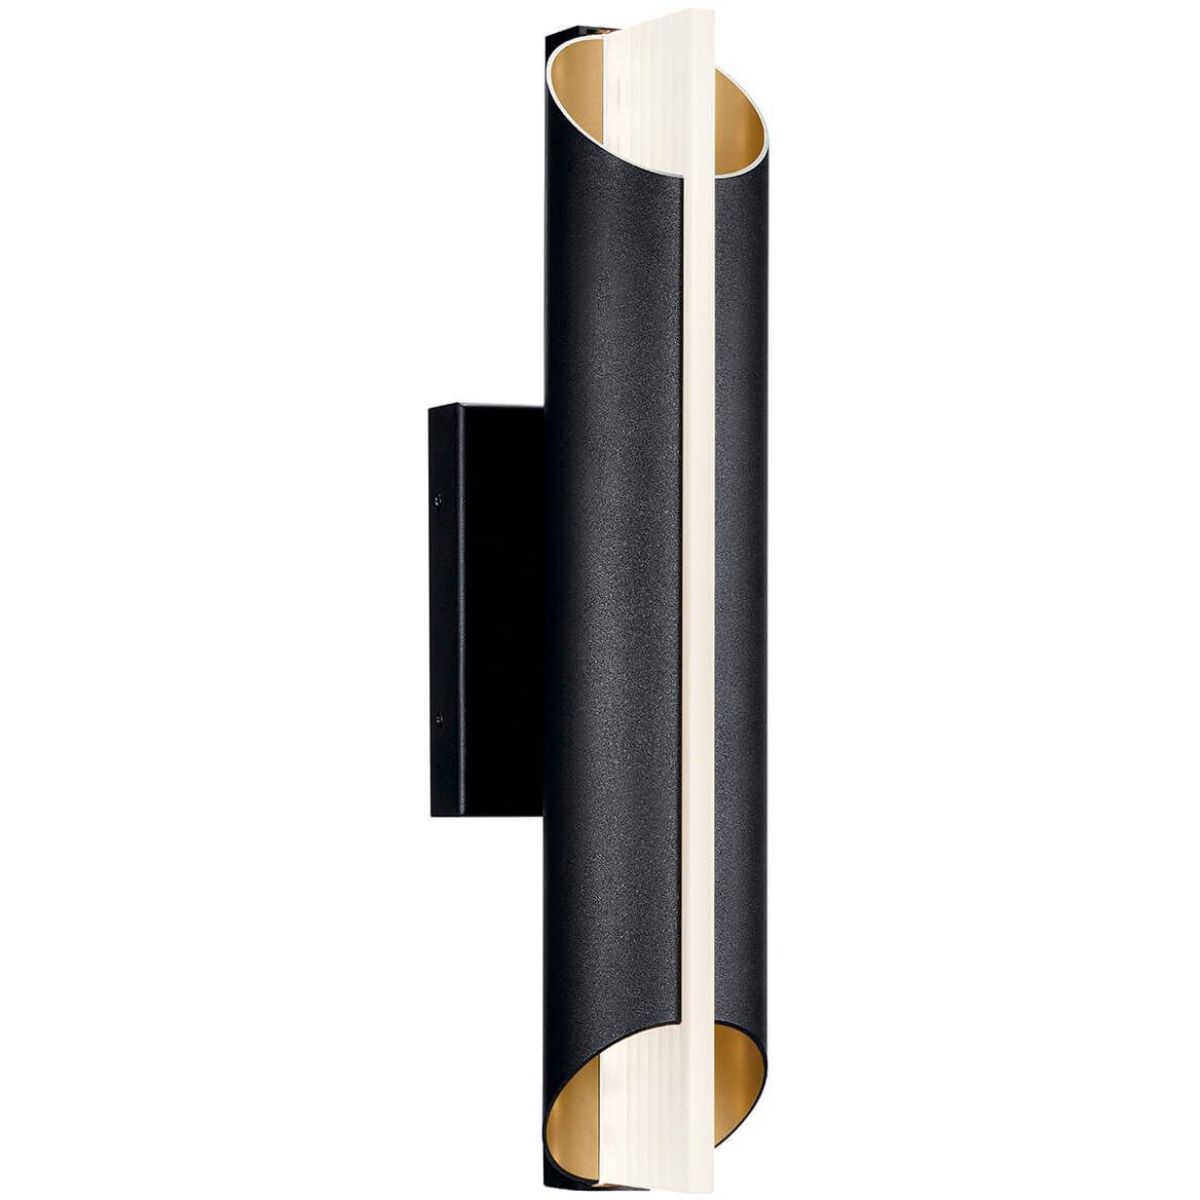 Astalis 21 in. LED Outdoor Wall Sconce 3000K Textured Black Finish